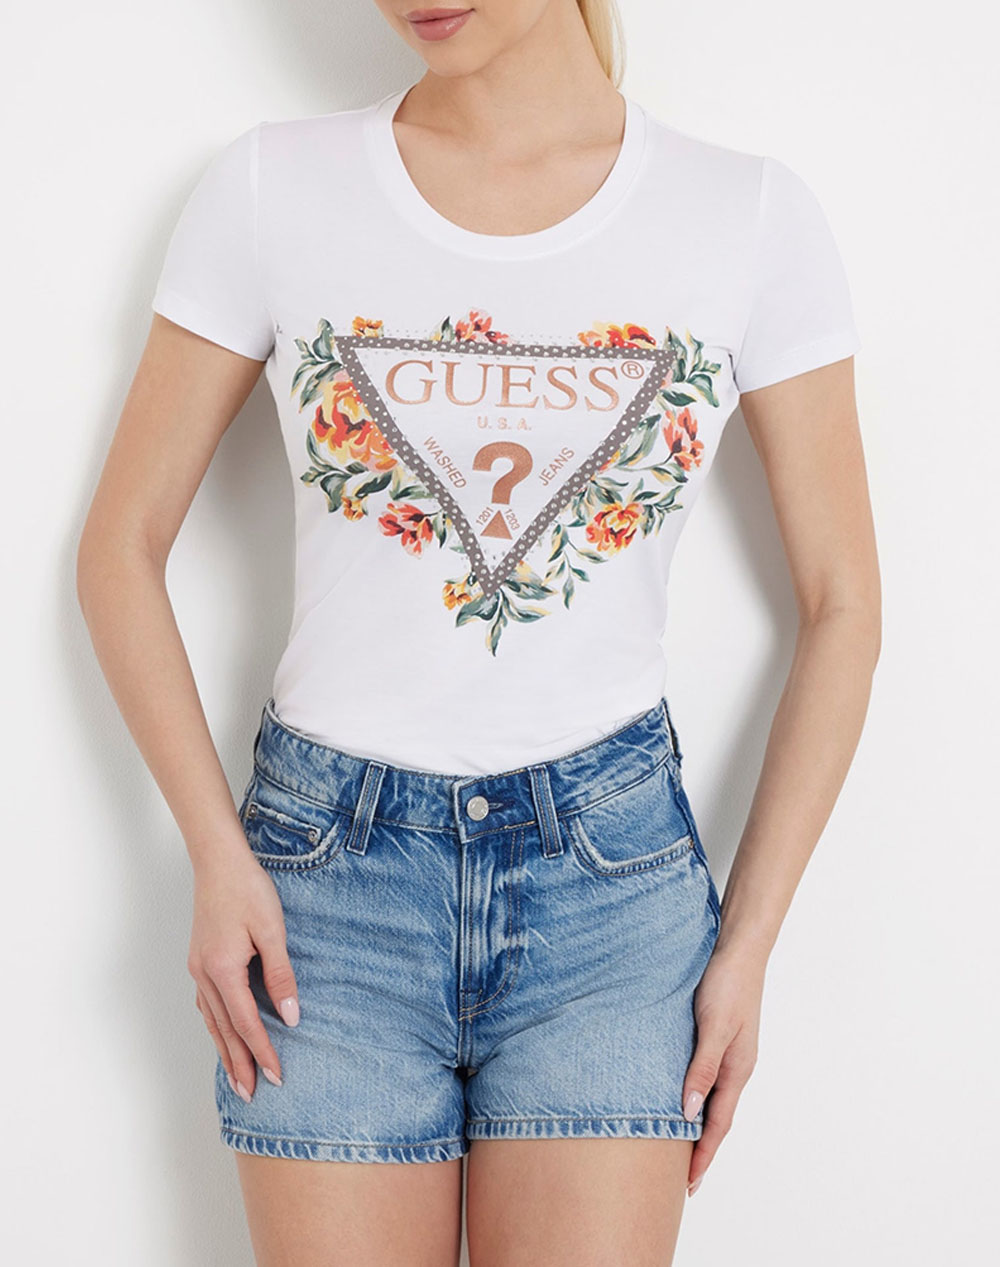 GUESS SS CN TRIANGLE FLOWERS TEE ΜΠΛΟΥΖΑ ΓΥΝΑΙΚΕΙΟ W4GI24J1314-G011 White 3810AGUES3400391_XR05646